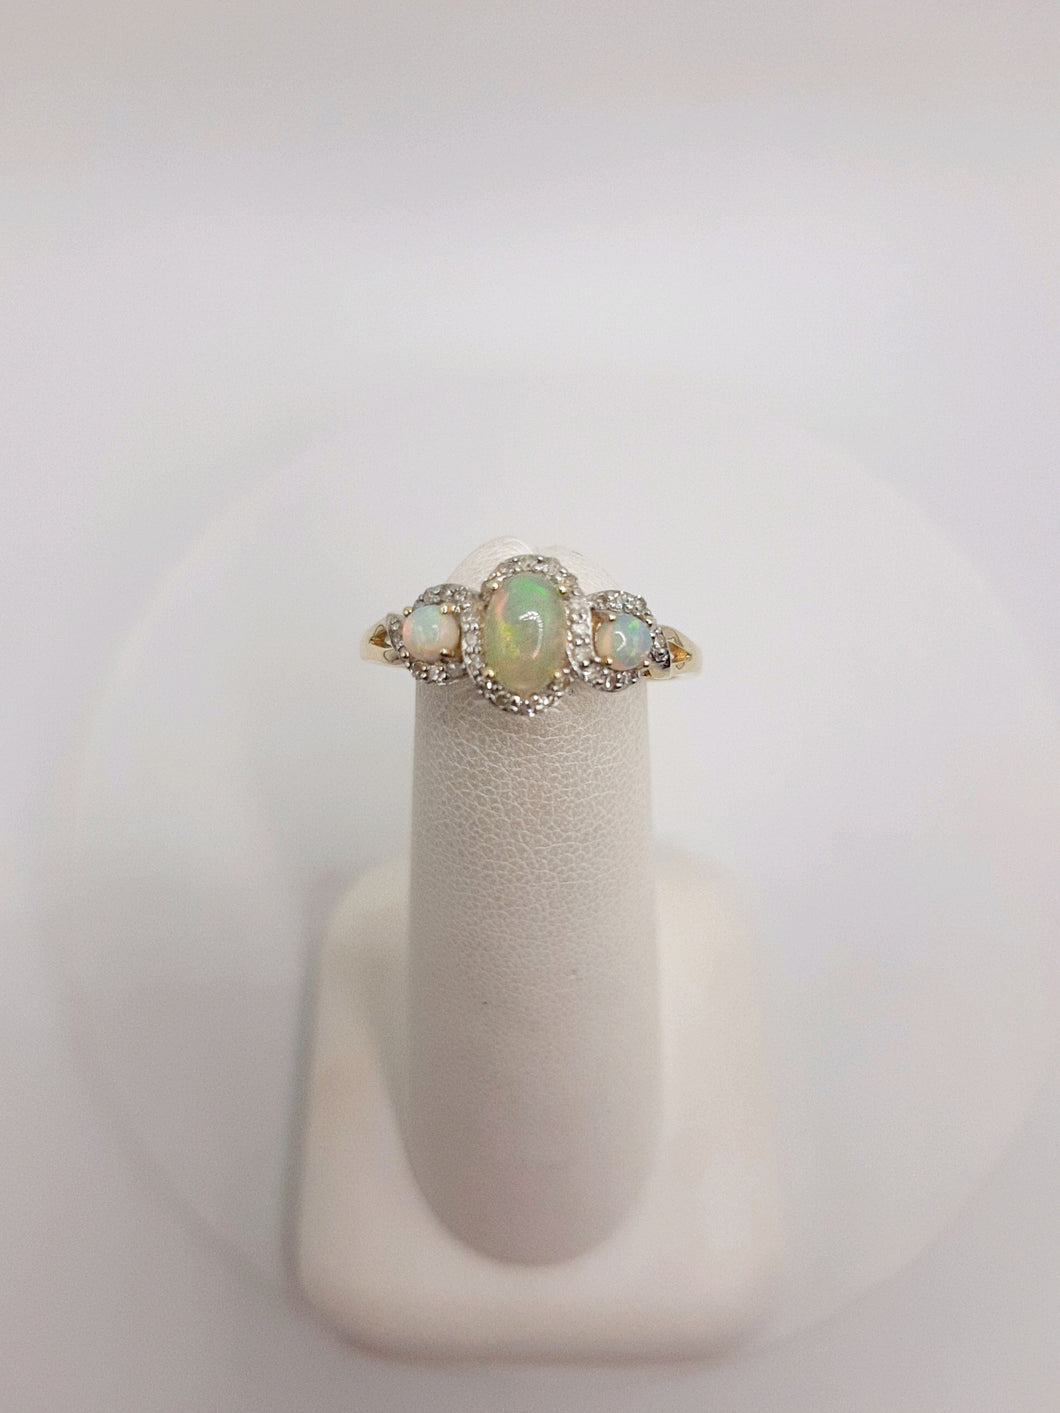 10kt Yellow Gold Three Stone Ring Featuring Opals and .14 carats of Diamonds